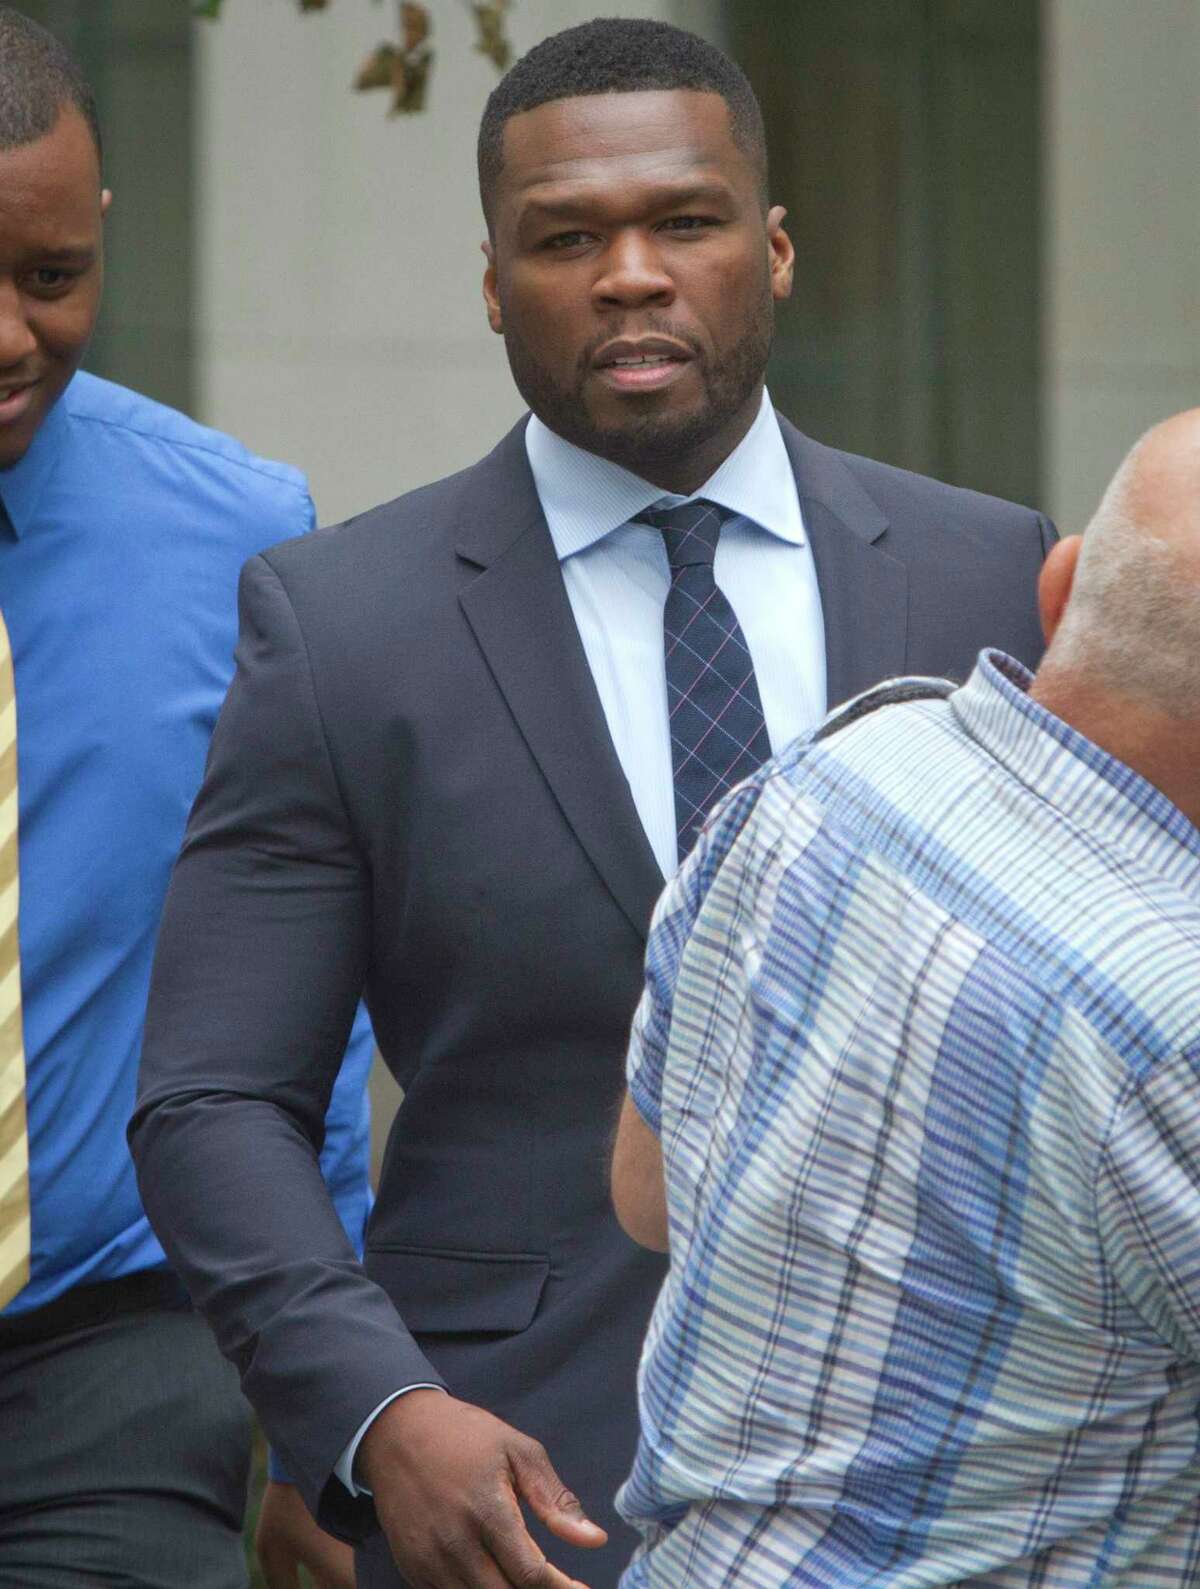 In this July 21, 2015 photo, rapper Curtis Jackson, also known as 50 Cent, leaves court after testifying in front of the jury about his finances, his business deals and the media attention surrounding his recent bankruptcy filing, in New York.